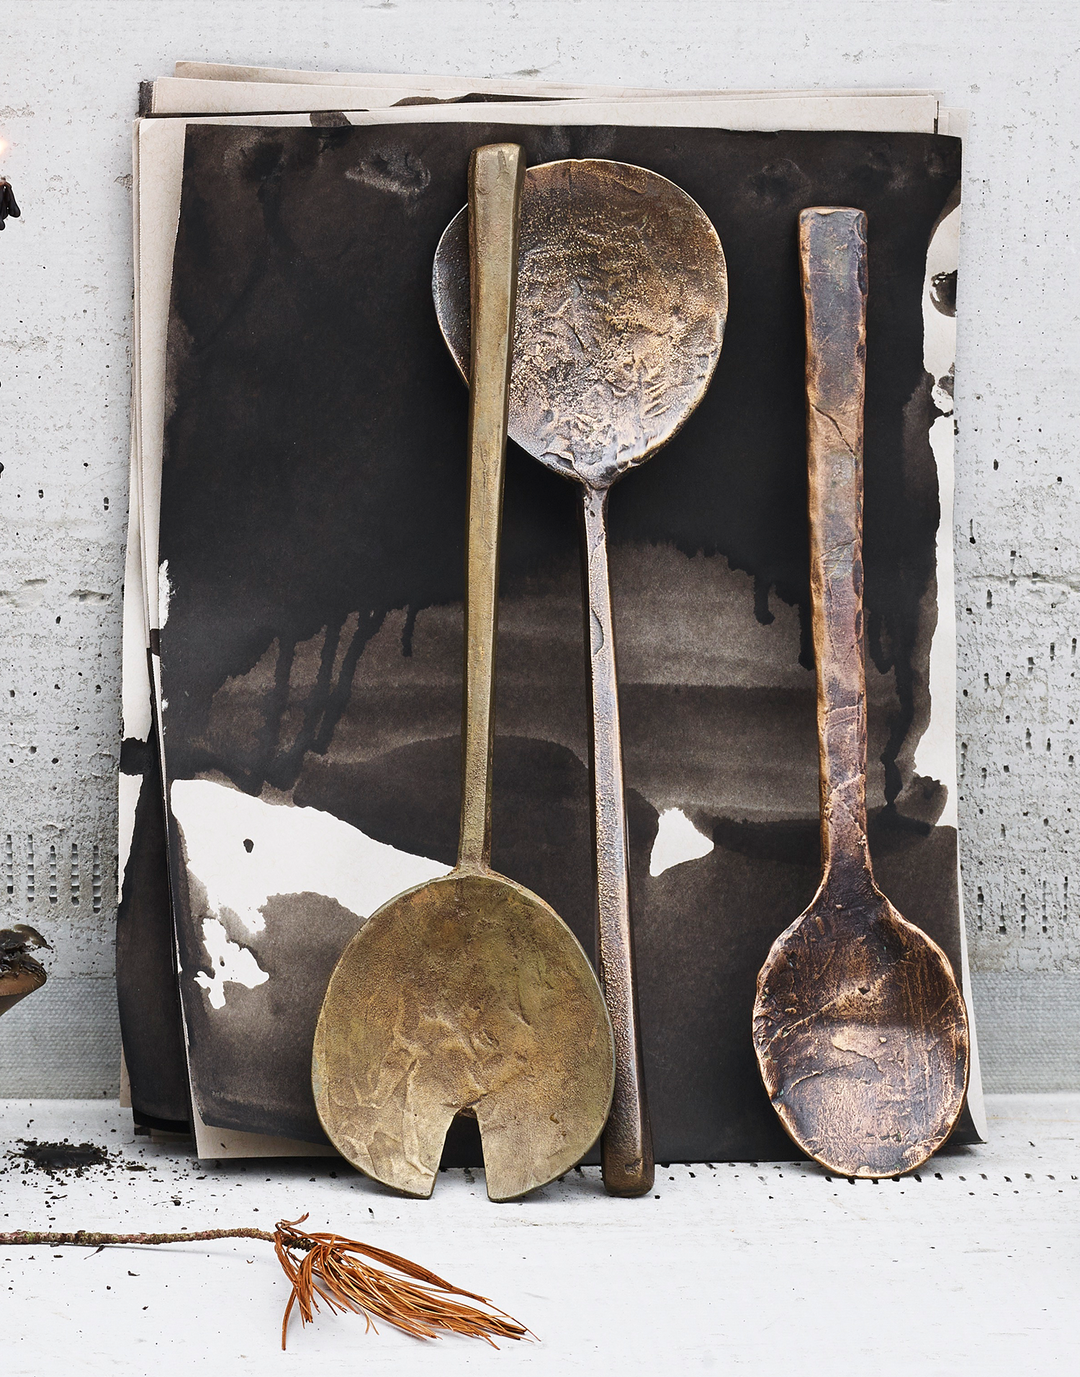 Hand cast bronze serving utensils on black ink paper with bronze spoon and pine needles on concrete background